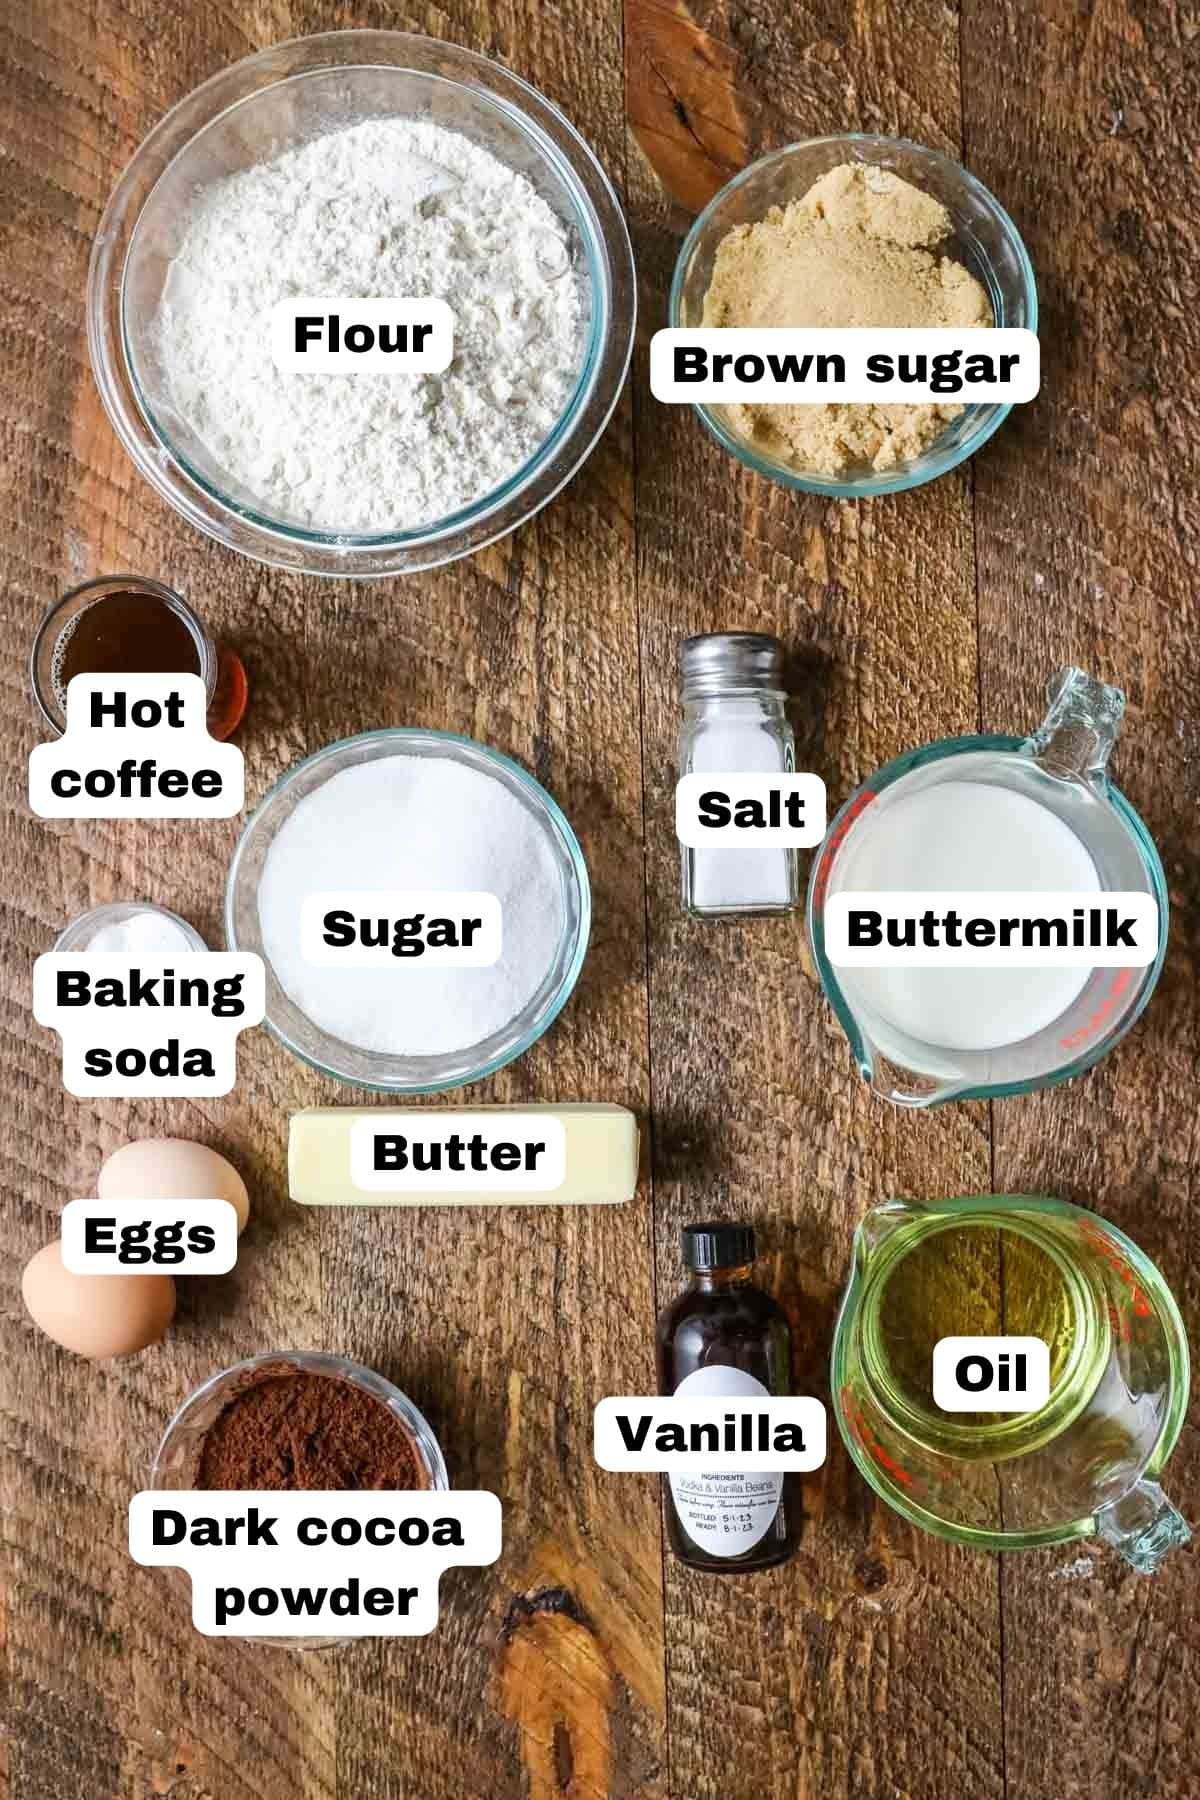 Overhead view of labelled ingredients including cocoa powder, brown sugar, coffee, and more.